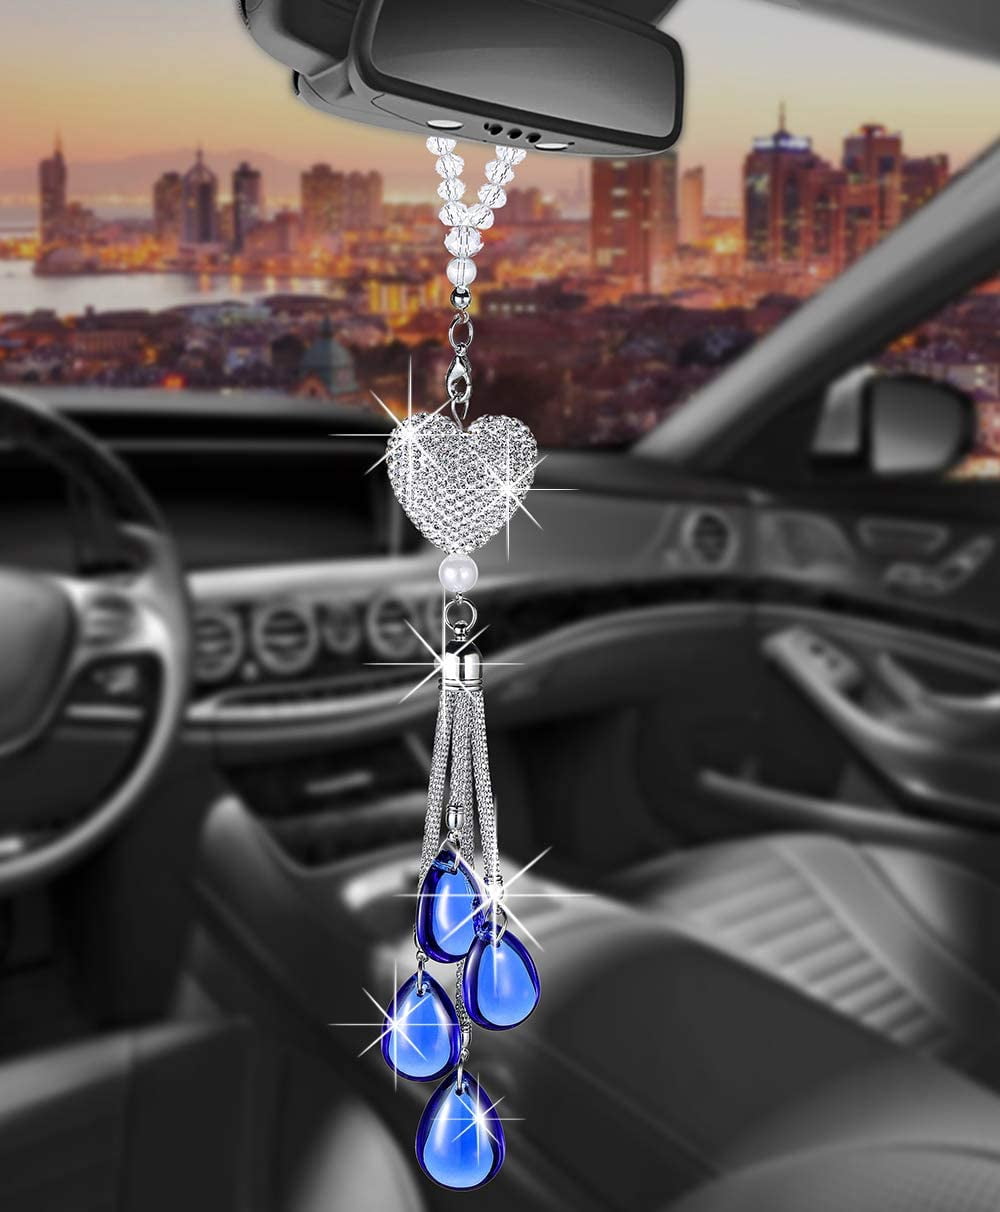 Sun Catchers Ornament Chain 10.63in Lucky Car Hanging Accessories for Women 2PCS Rhinestones Diamond Love Heart Bling Rear View Mirror Pendant Color : Gray 